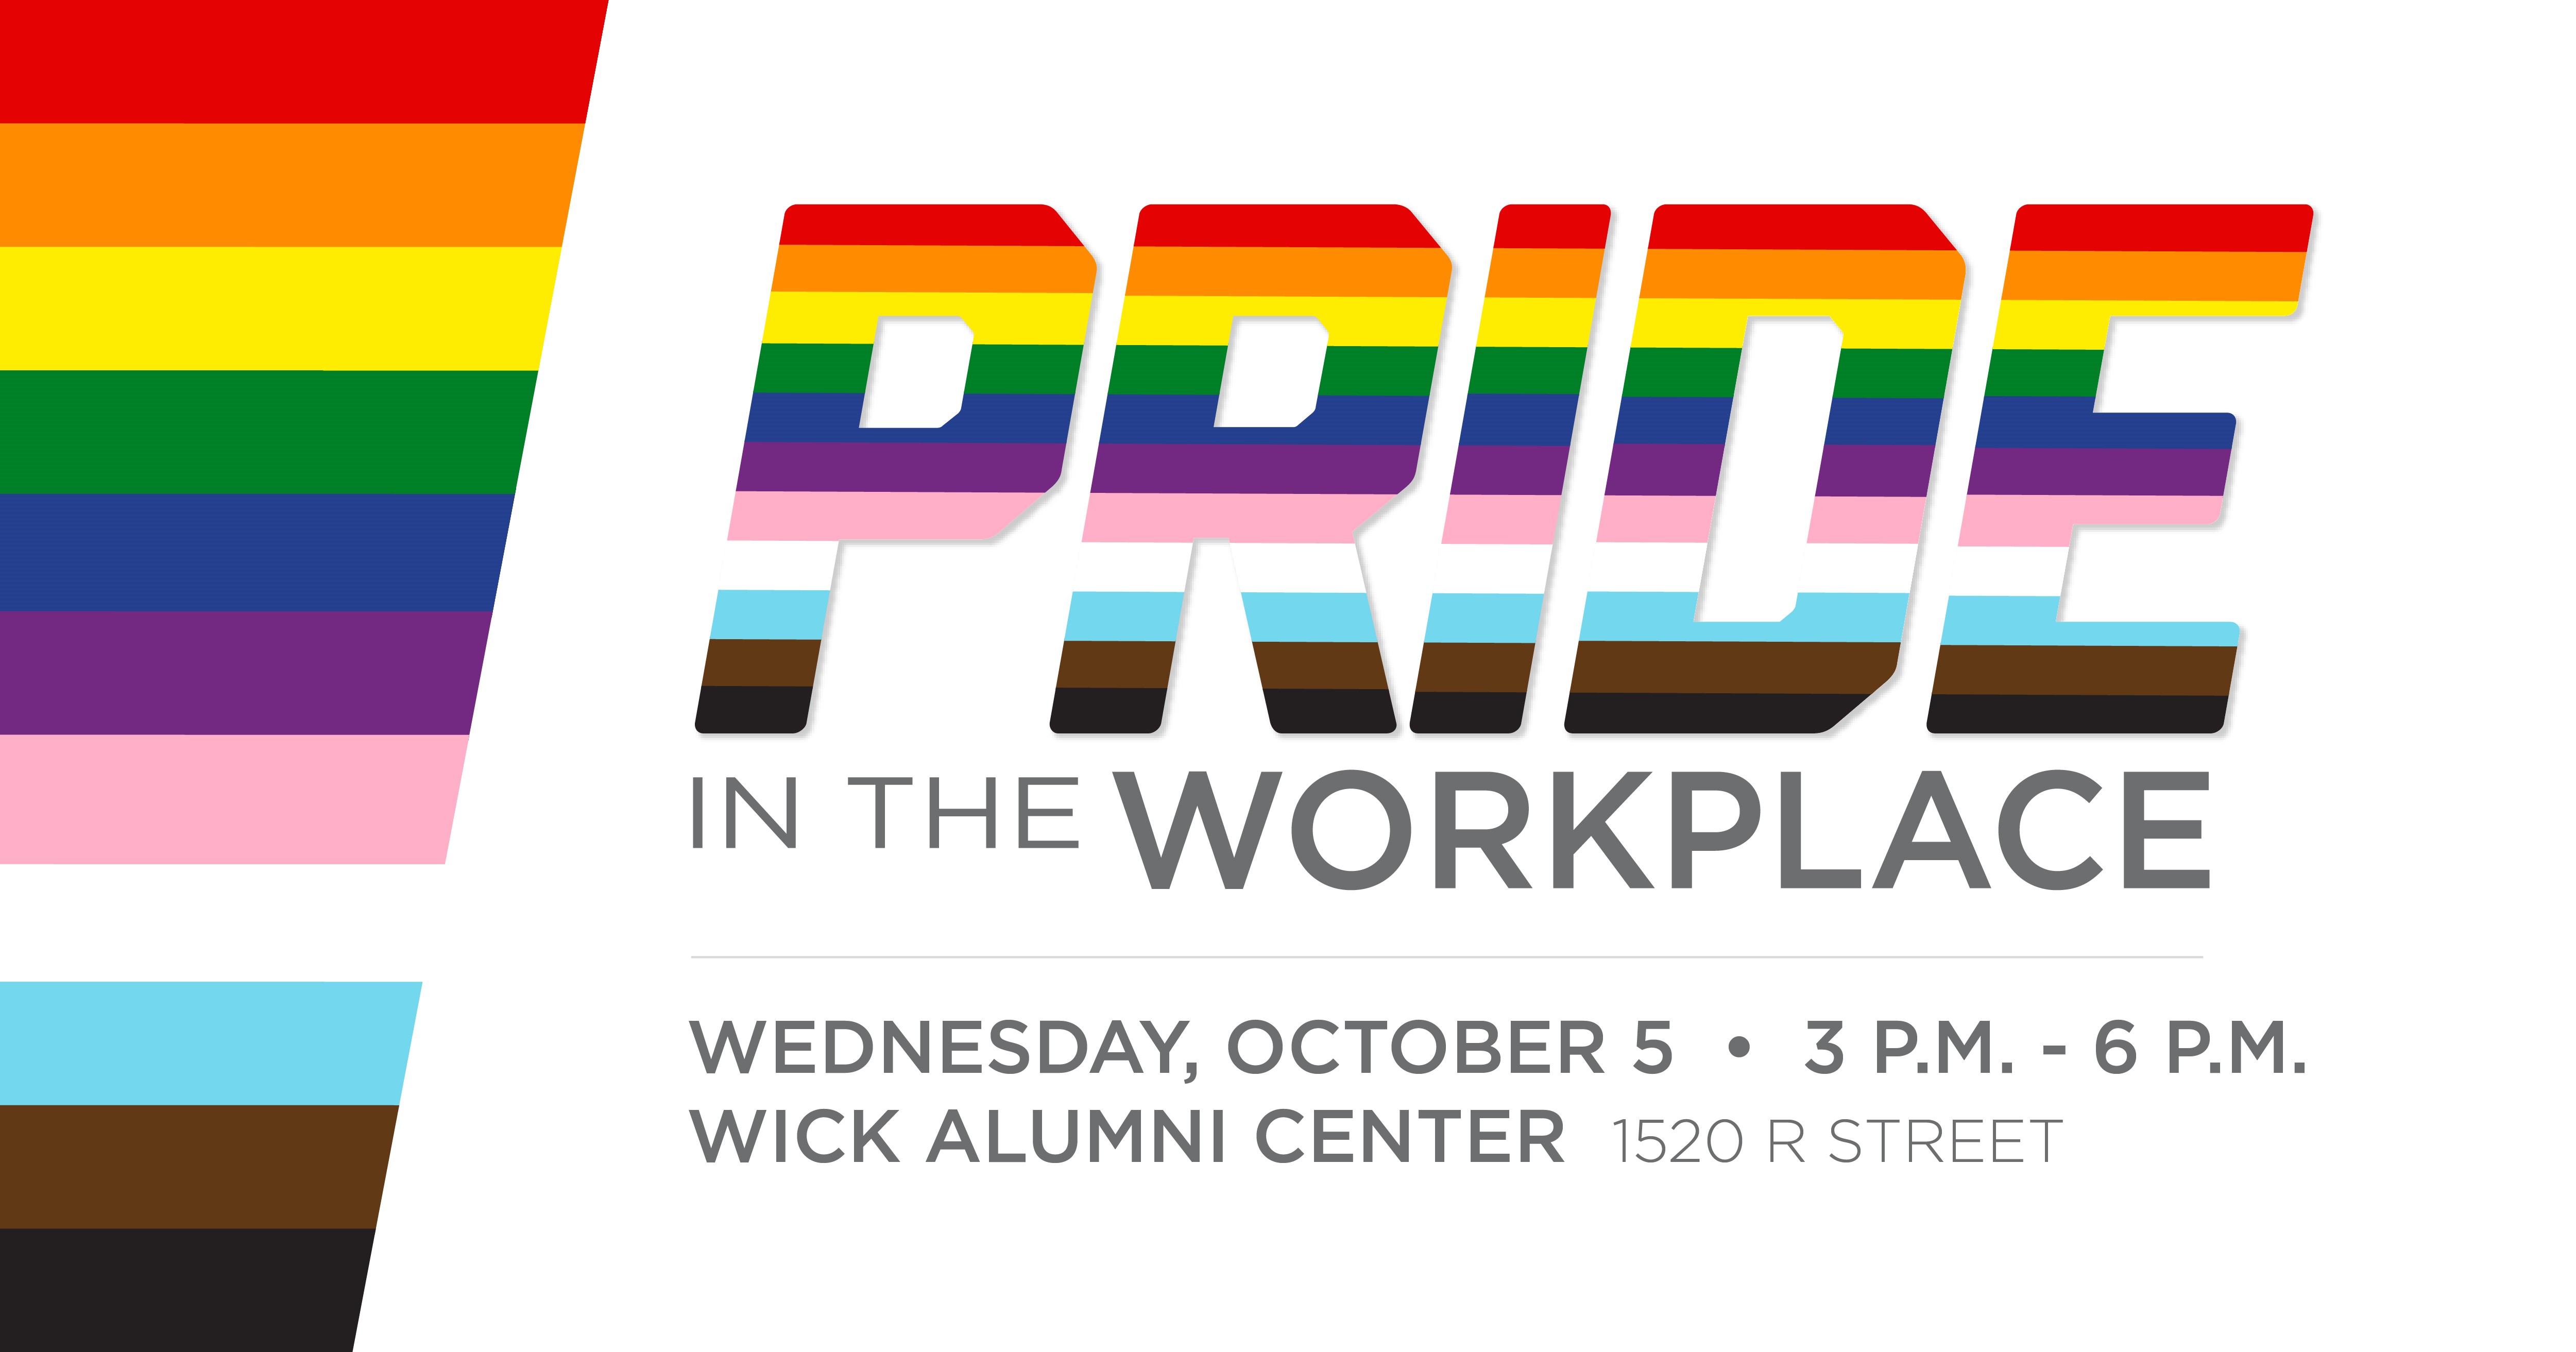 Pride In The Workplace